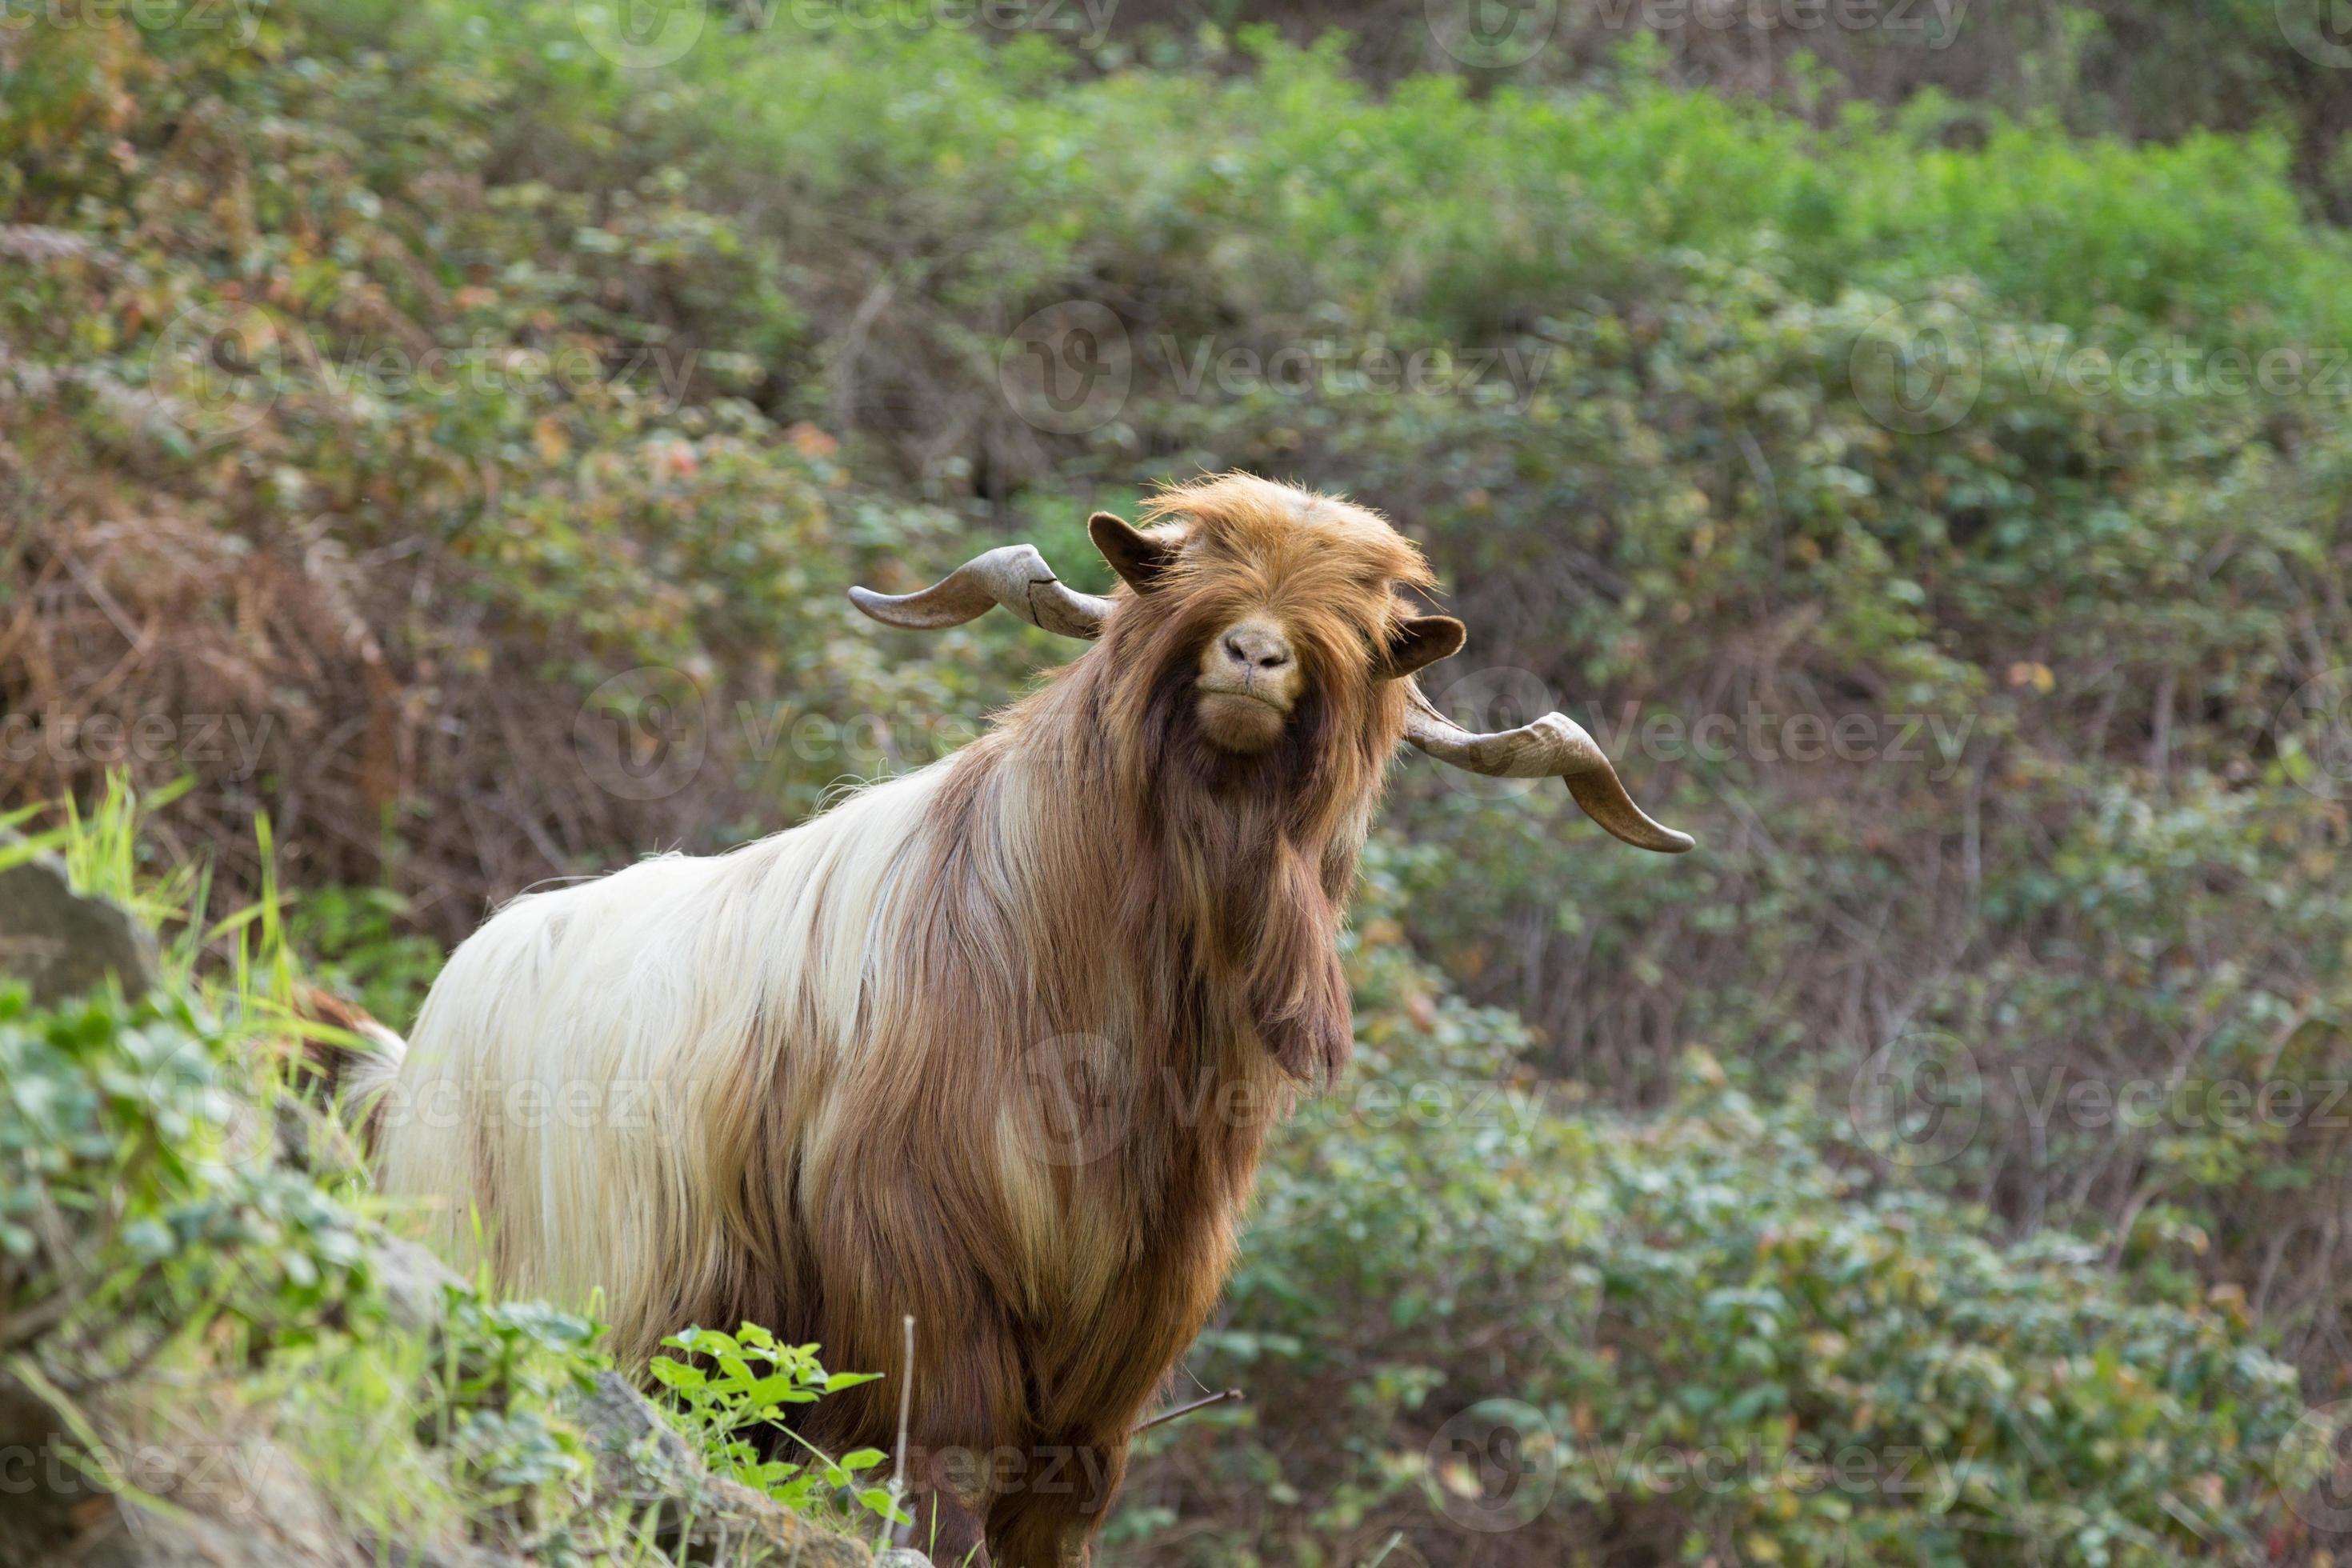 Long haired goat in La Gomera 705930 Stock Photo at Vecteezy